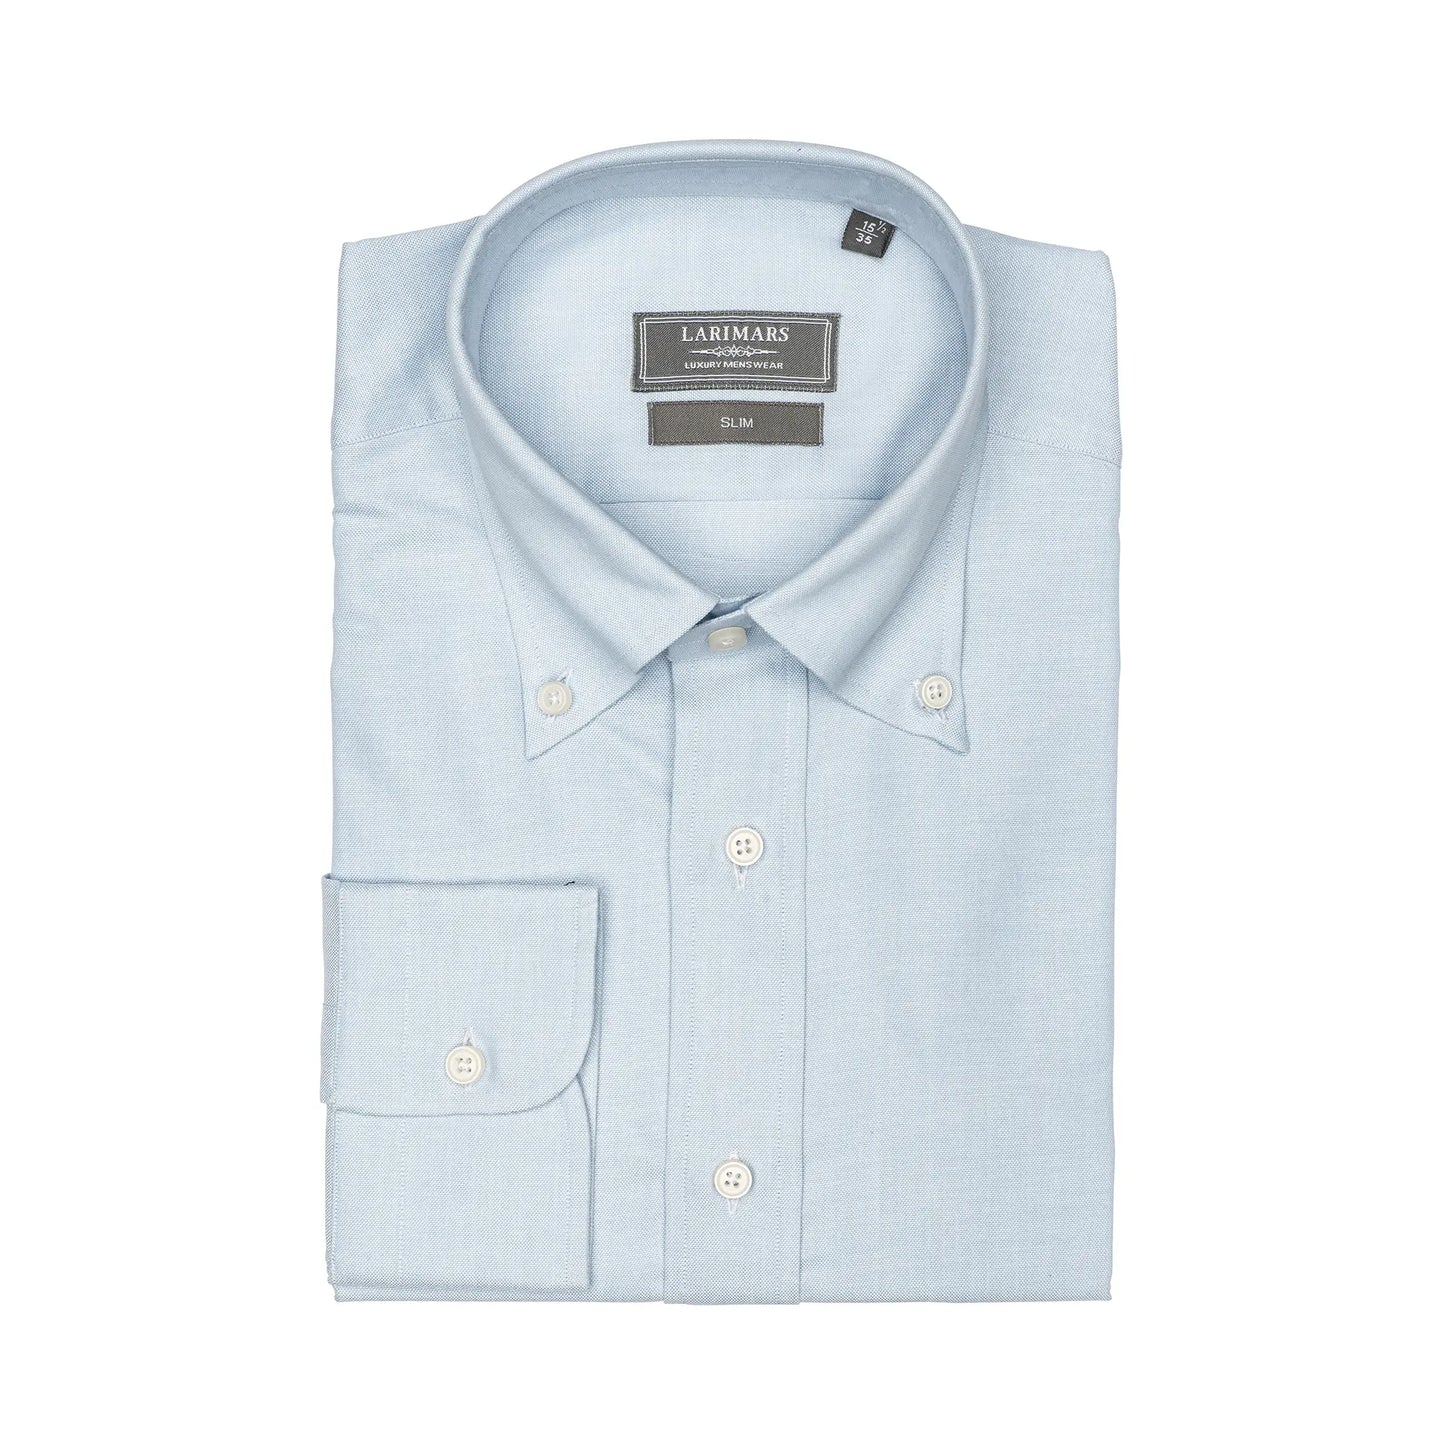 Sky Blue | Light Weight Oxford - Larimars Clothing Men's Formal and casual wear shirts